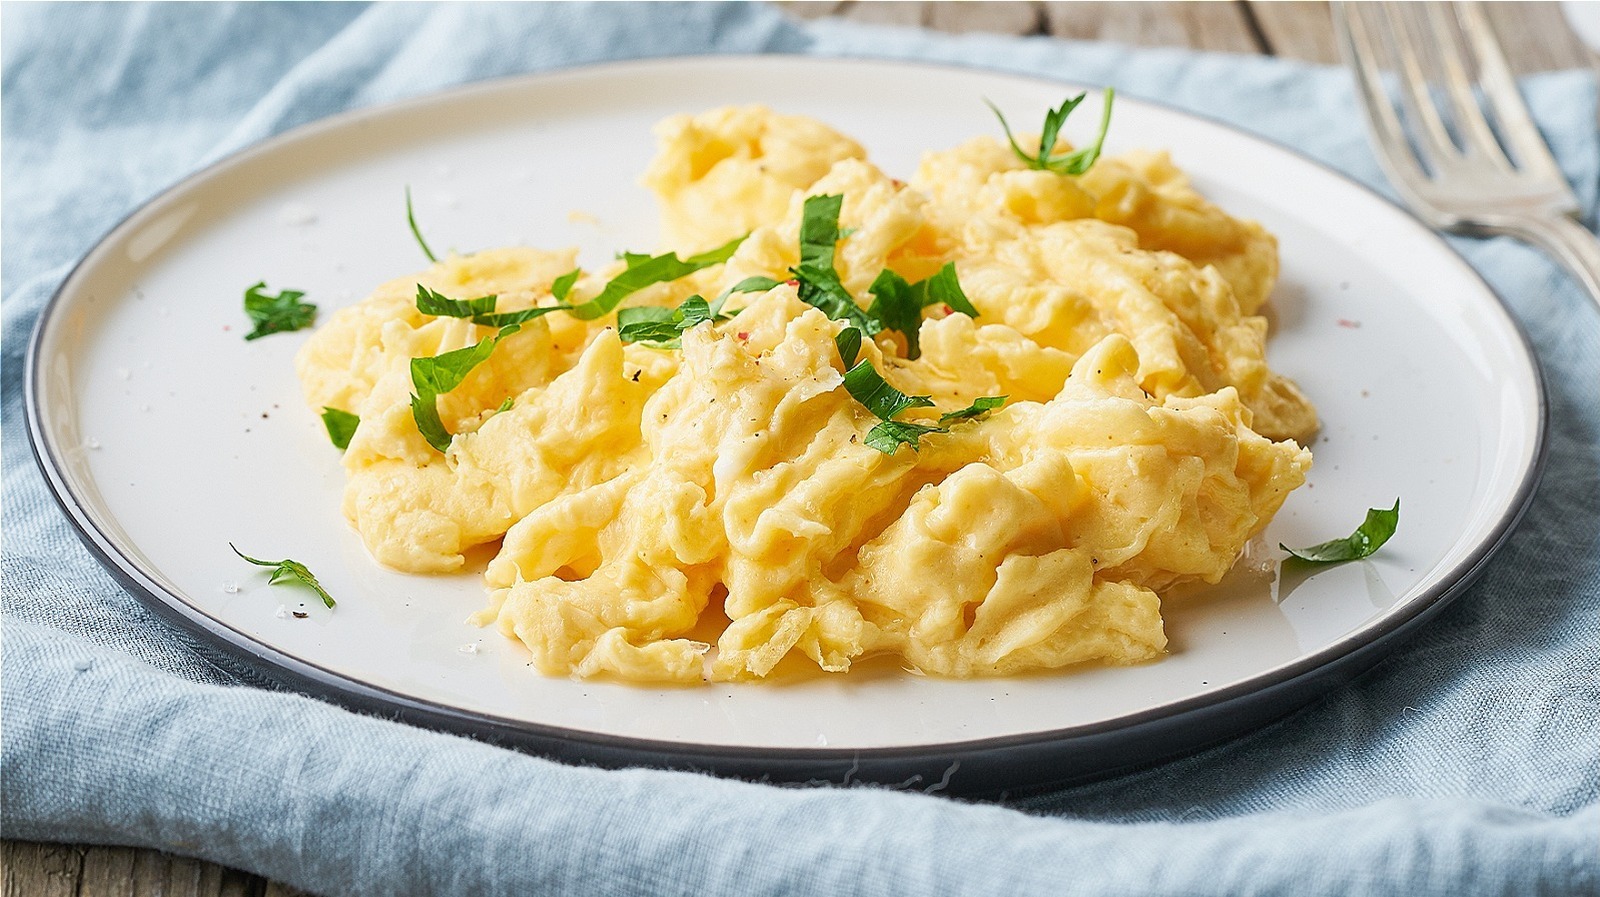 https://www.mashed.com/img/gallery/the-effortless-immersion-blender-method-for-smoother-scrambled-eggs/l-intro-1675679157.jpg